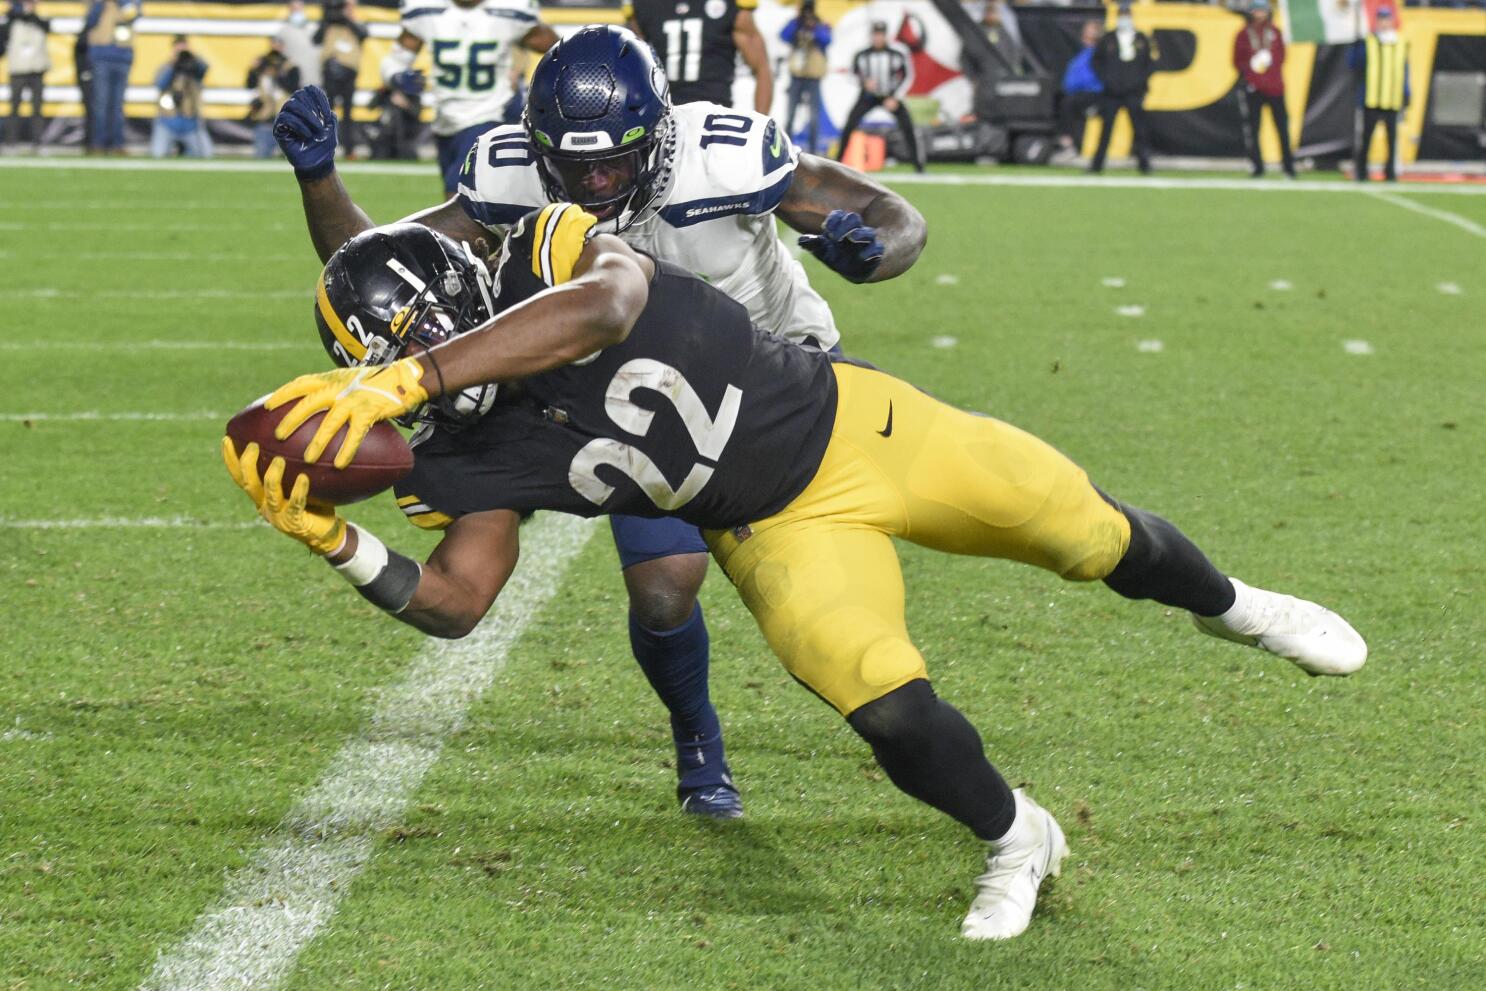 With approval of 17th regular-season game, Steelers get home matchup  against Seahawks